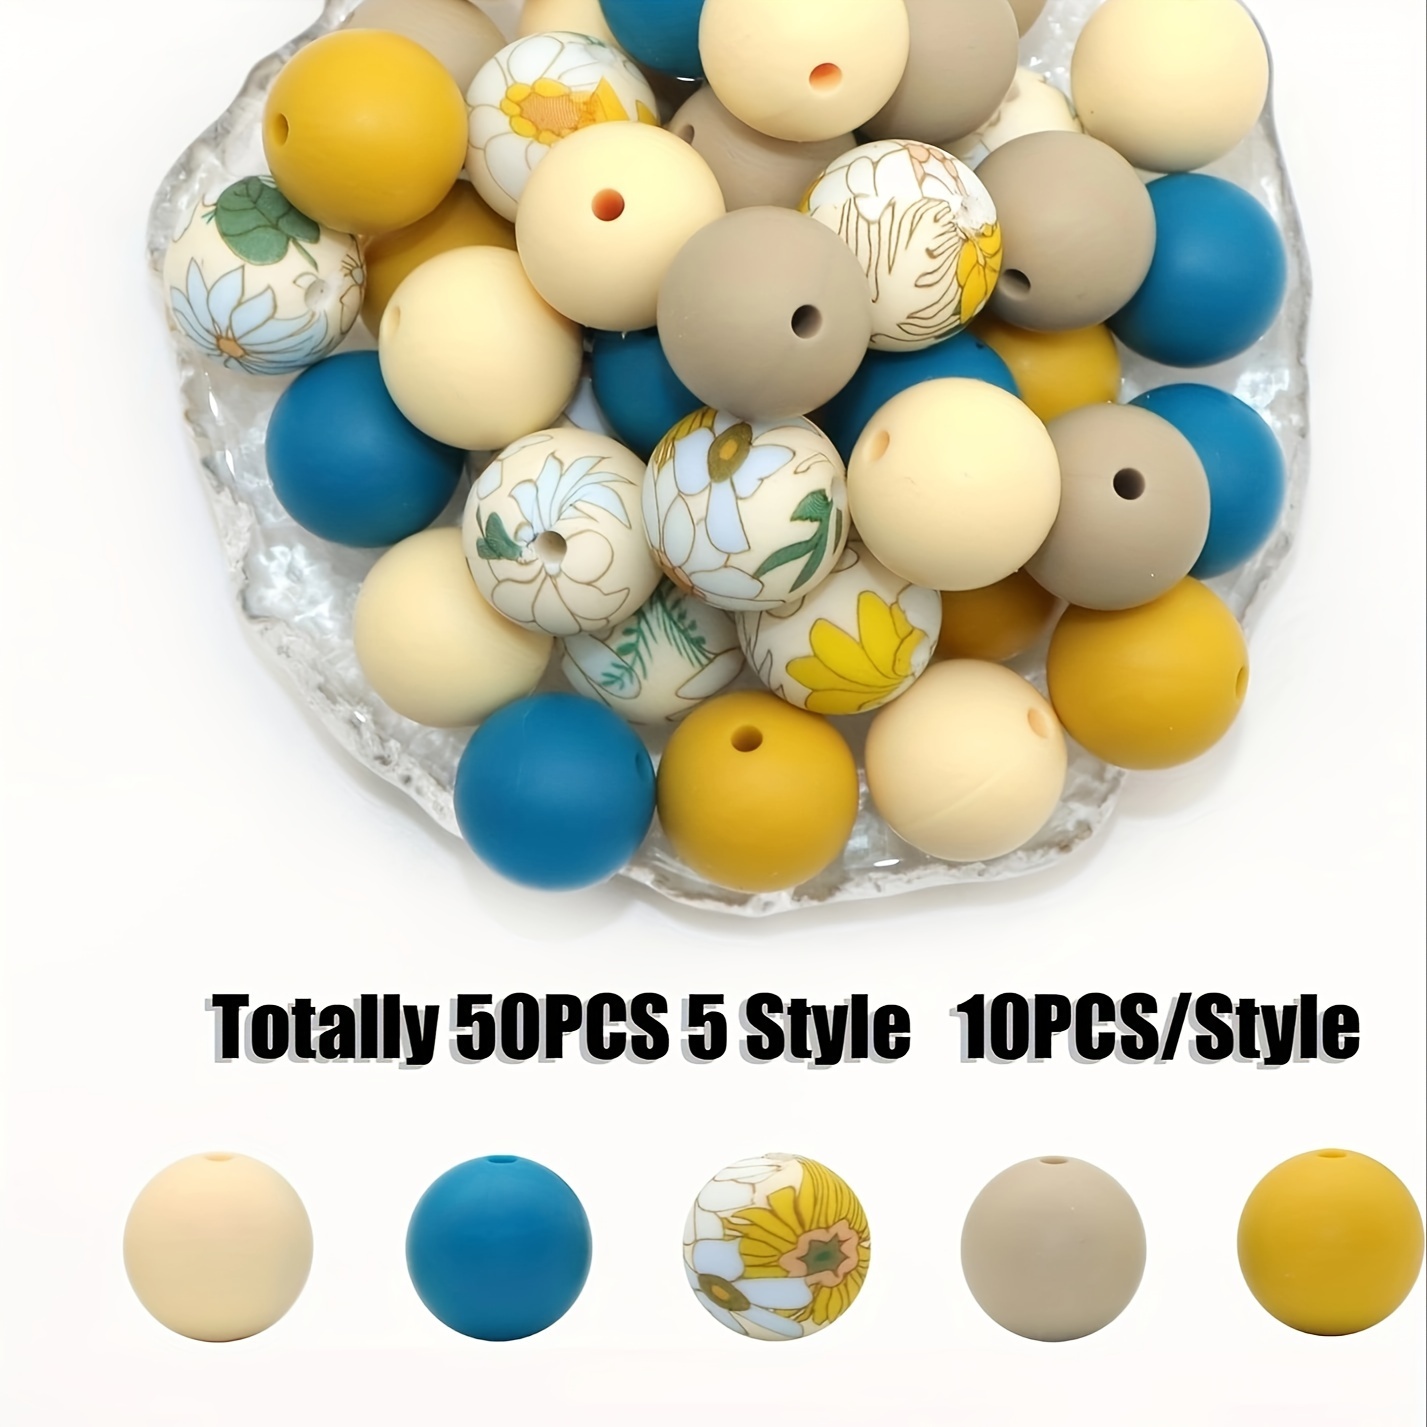 

Accessories Silicone Beads 15mm Silicone Beads Bulk Round Silicone Beads For Keychain Pens Lanyards Bracelet Necklace Jewelry Making Diy Craft 50pcs